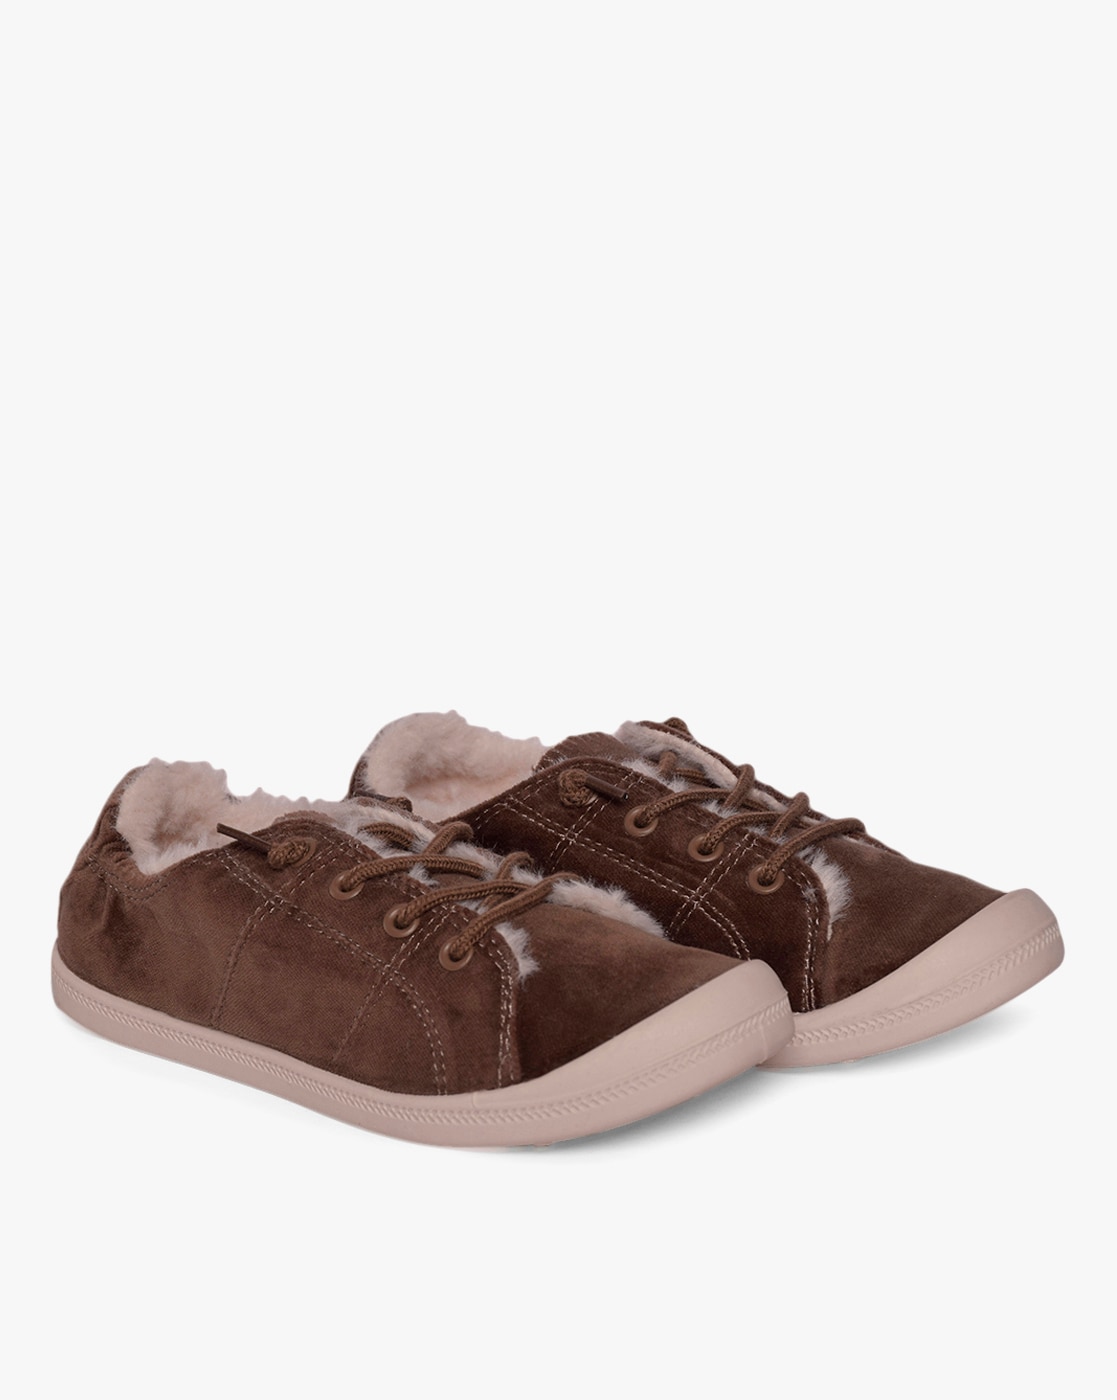 Buy Brown Casual Shoes for Men by 